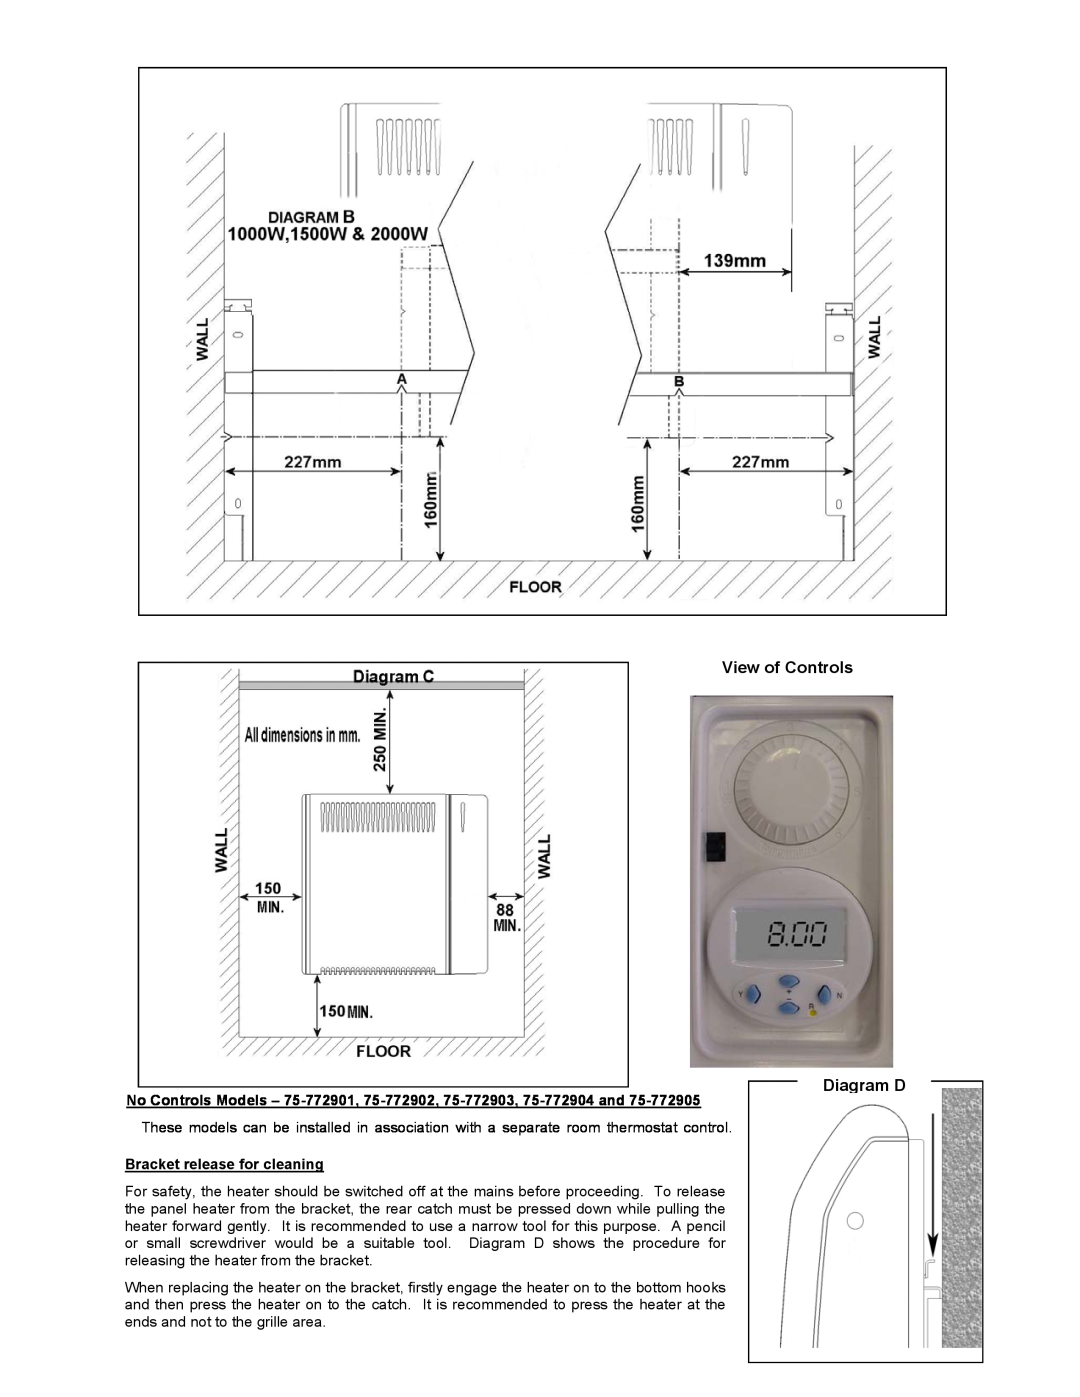 Creda NPP50 75-773001, NPP50S 75-773011, NPP200 75-773004 dimensions View of Controls Diagram D, Bracket release for cleaning 